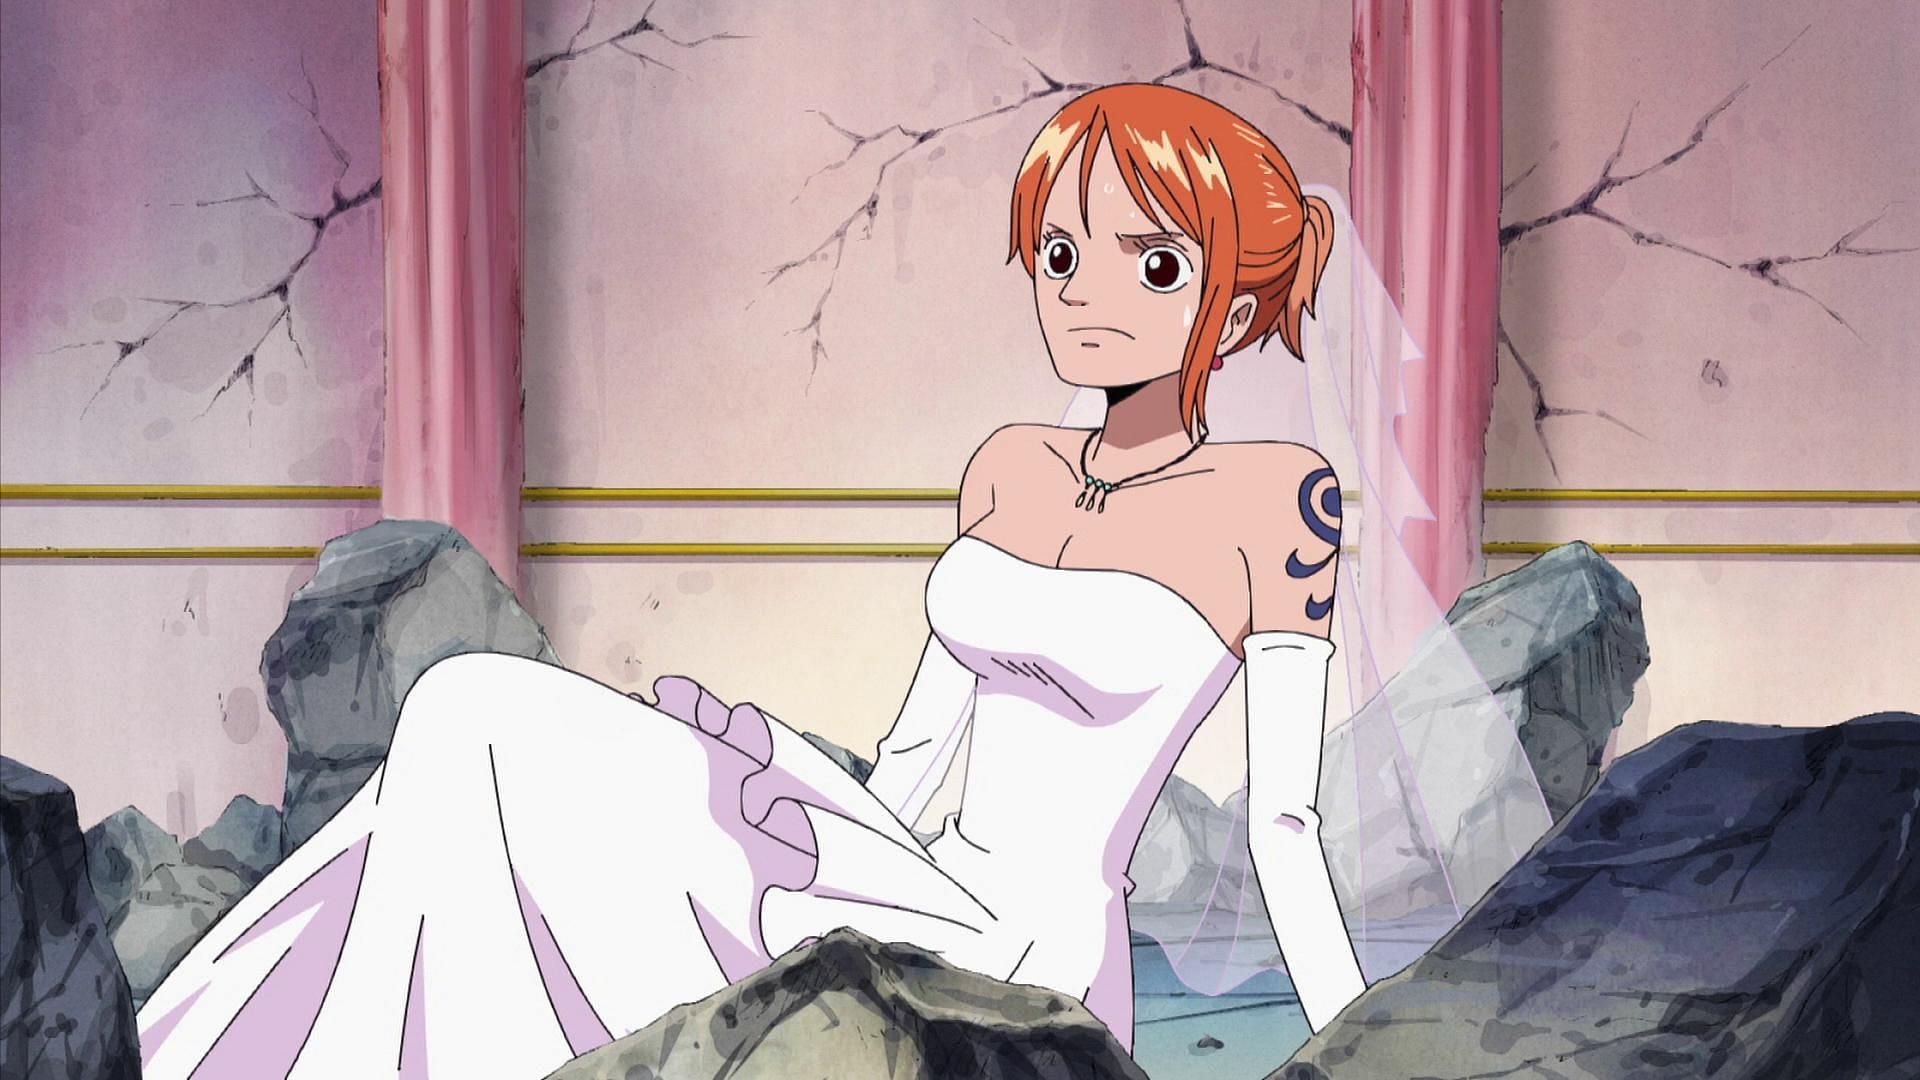 Favorite Nami outfit? Mine would be Nami's Film Gold Outfit for